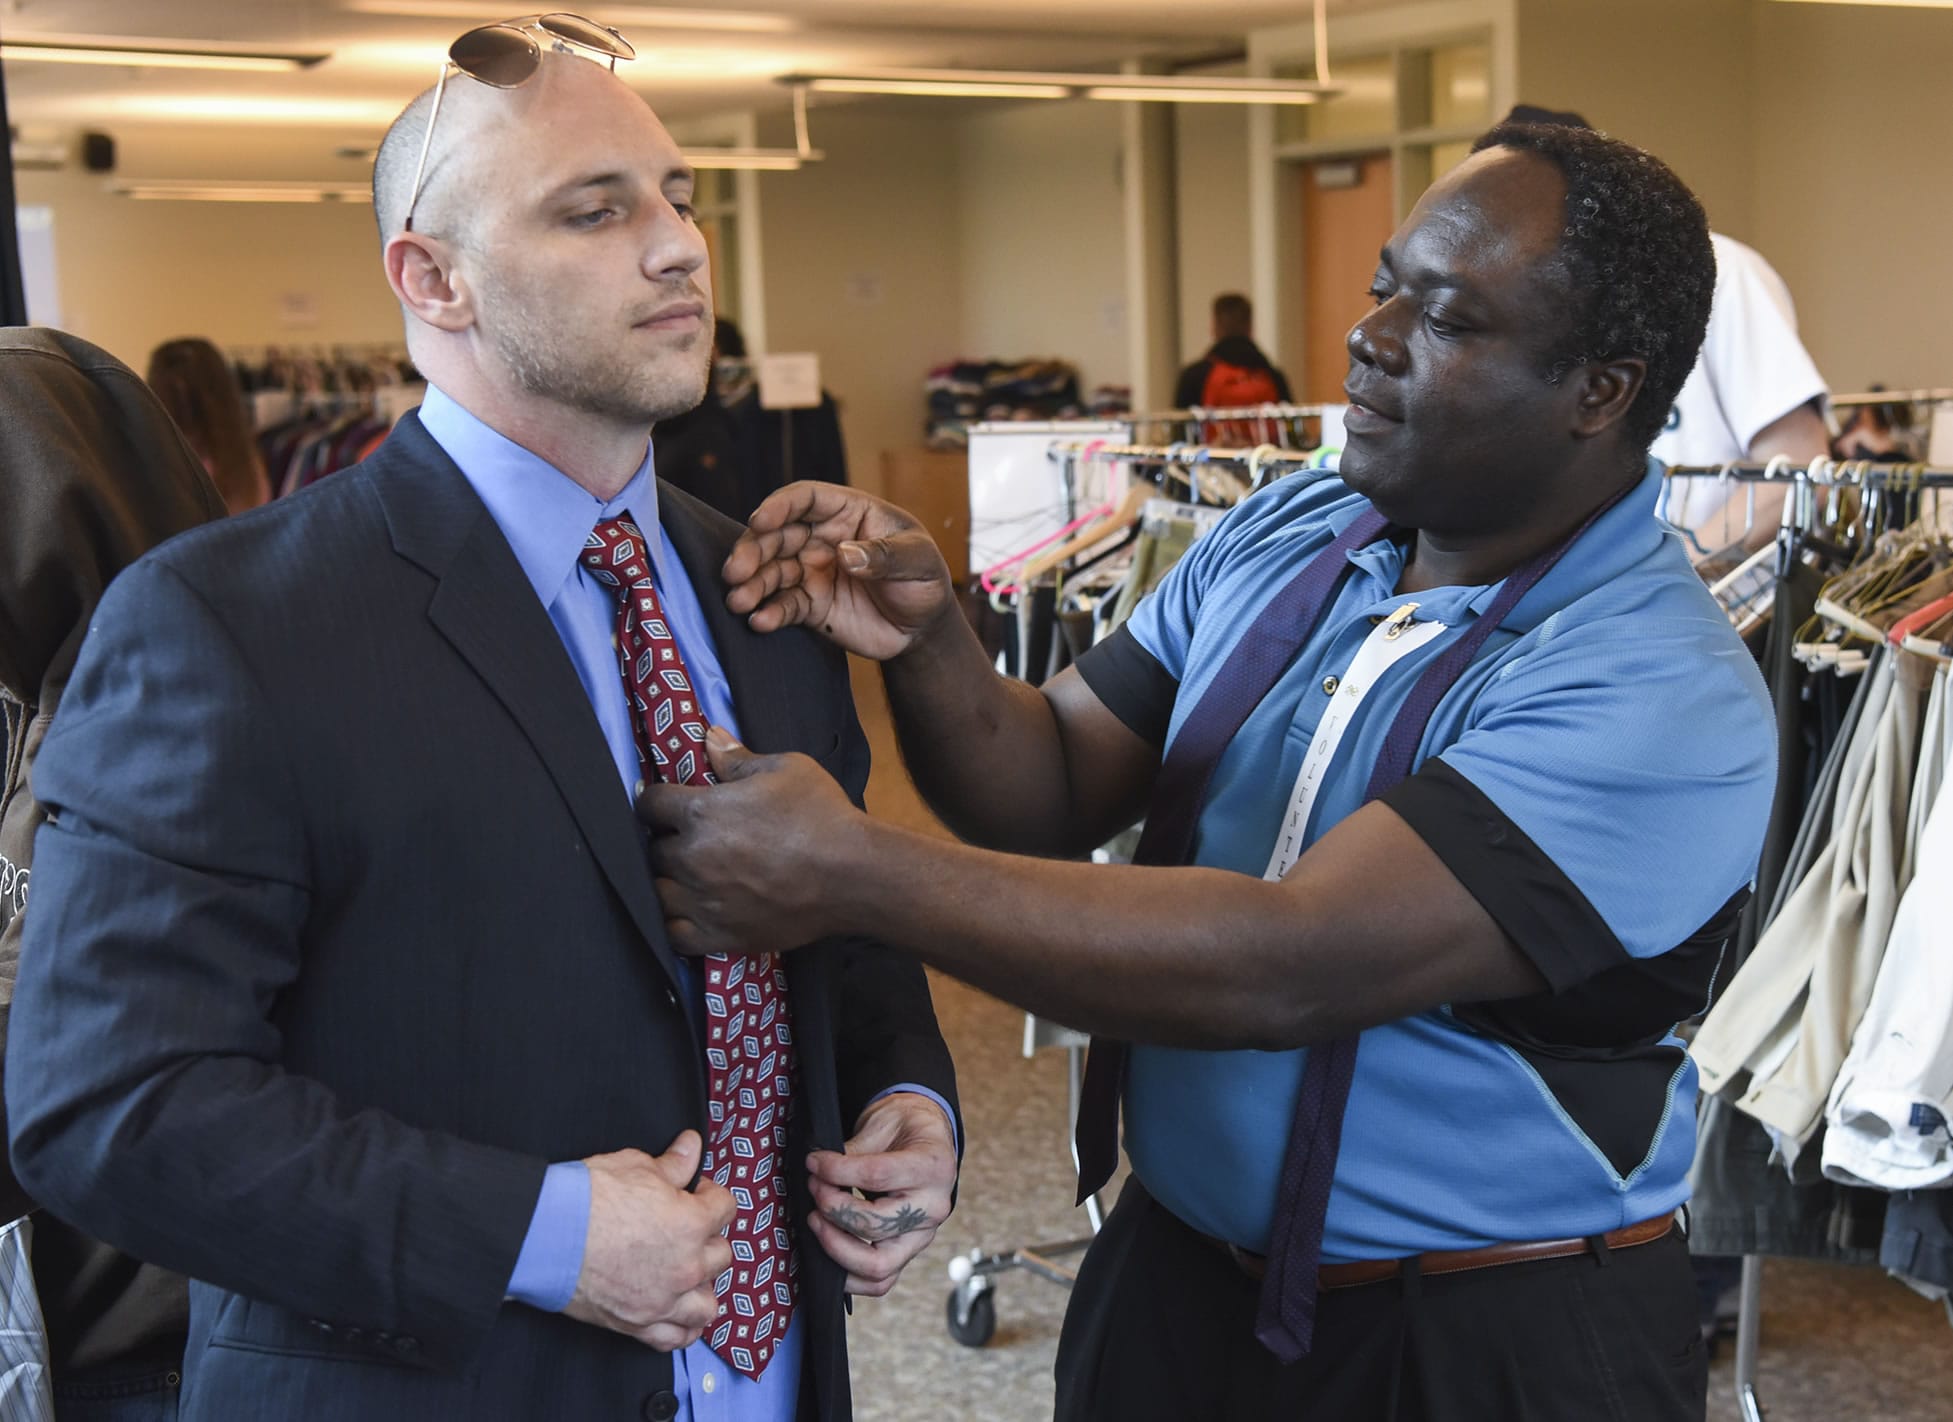 Nick Ak, a Career Clothing Closet volunteer, right, helps Clark College student George Esser with his necktie at the college’s Career Clothing Closet on Wednesday.